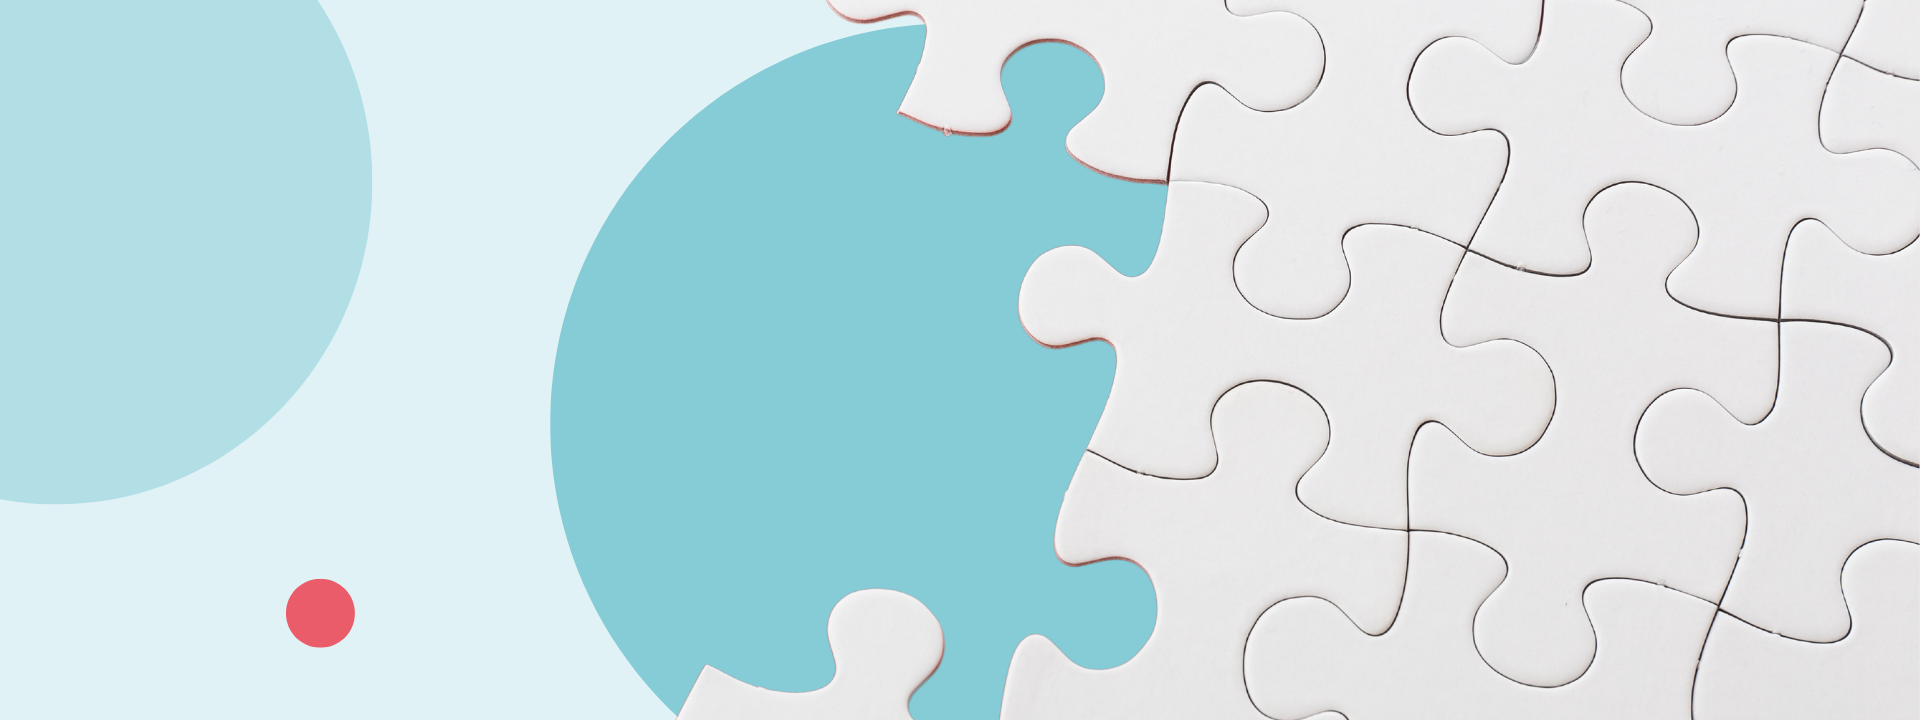 Marketing Integrations - Jigsaw pieces fitting together